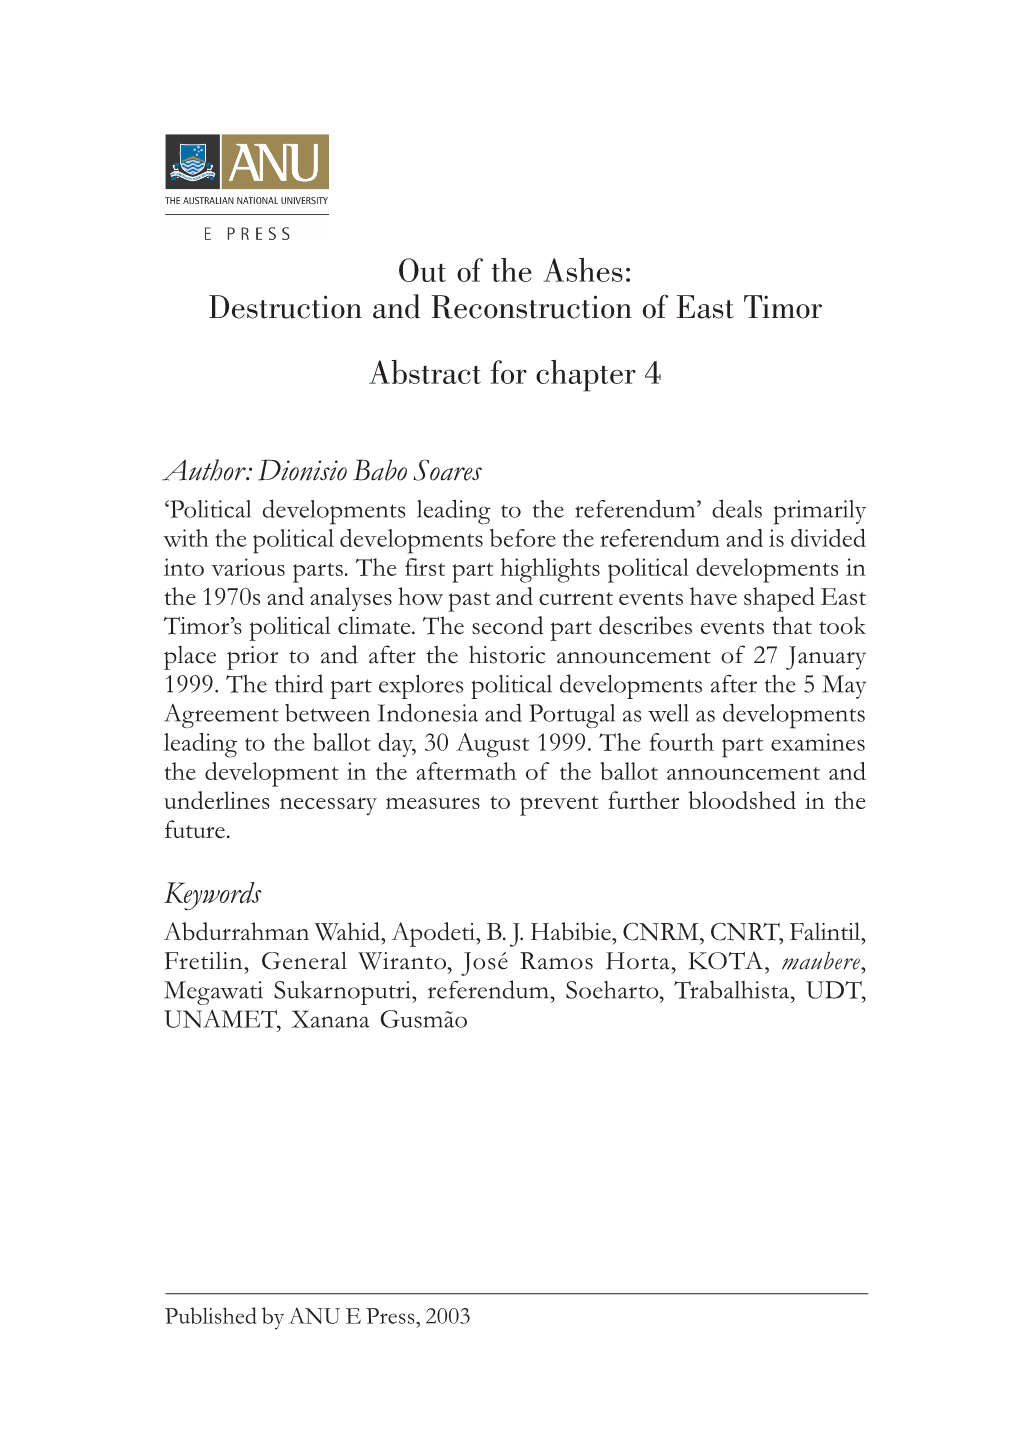 Destruction and Reconstruction of East Timor Abstract for Chapter 4